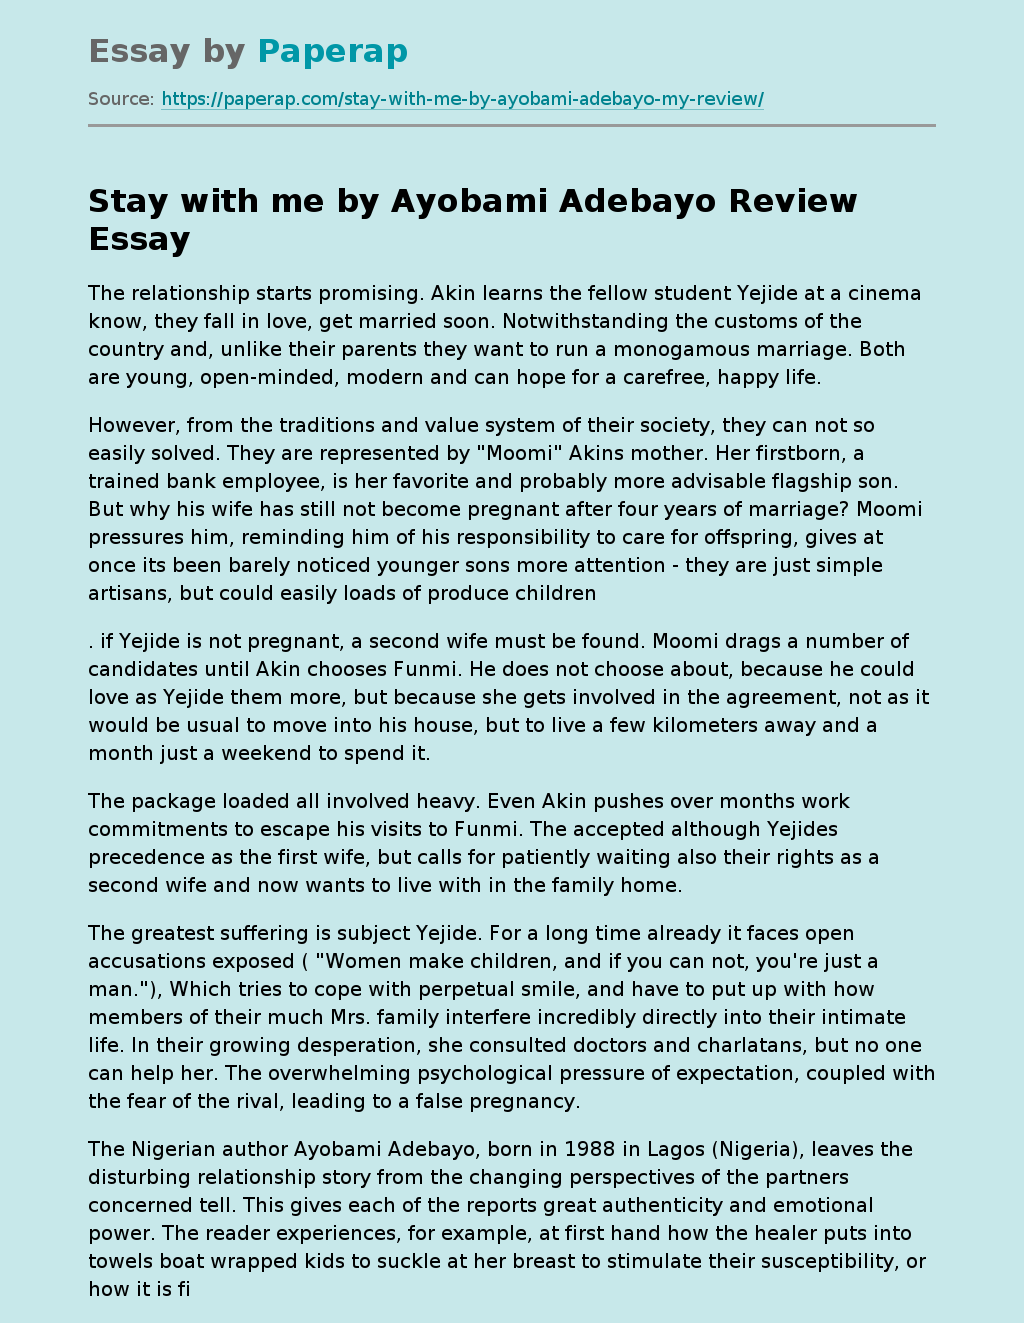 Stay with me by Ayobami Adebayo Review